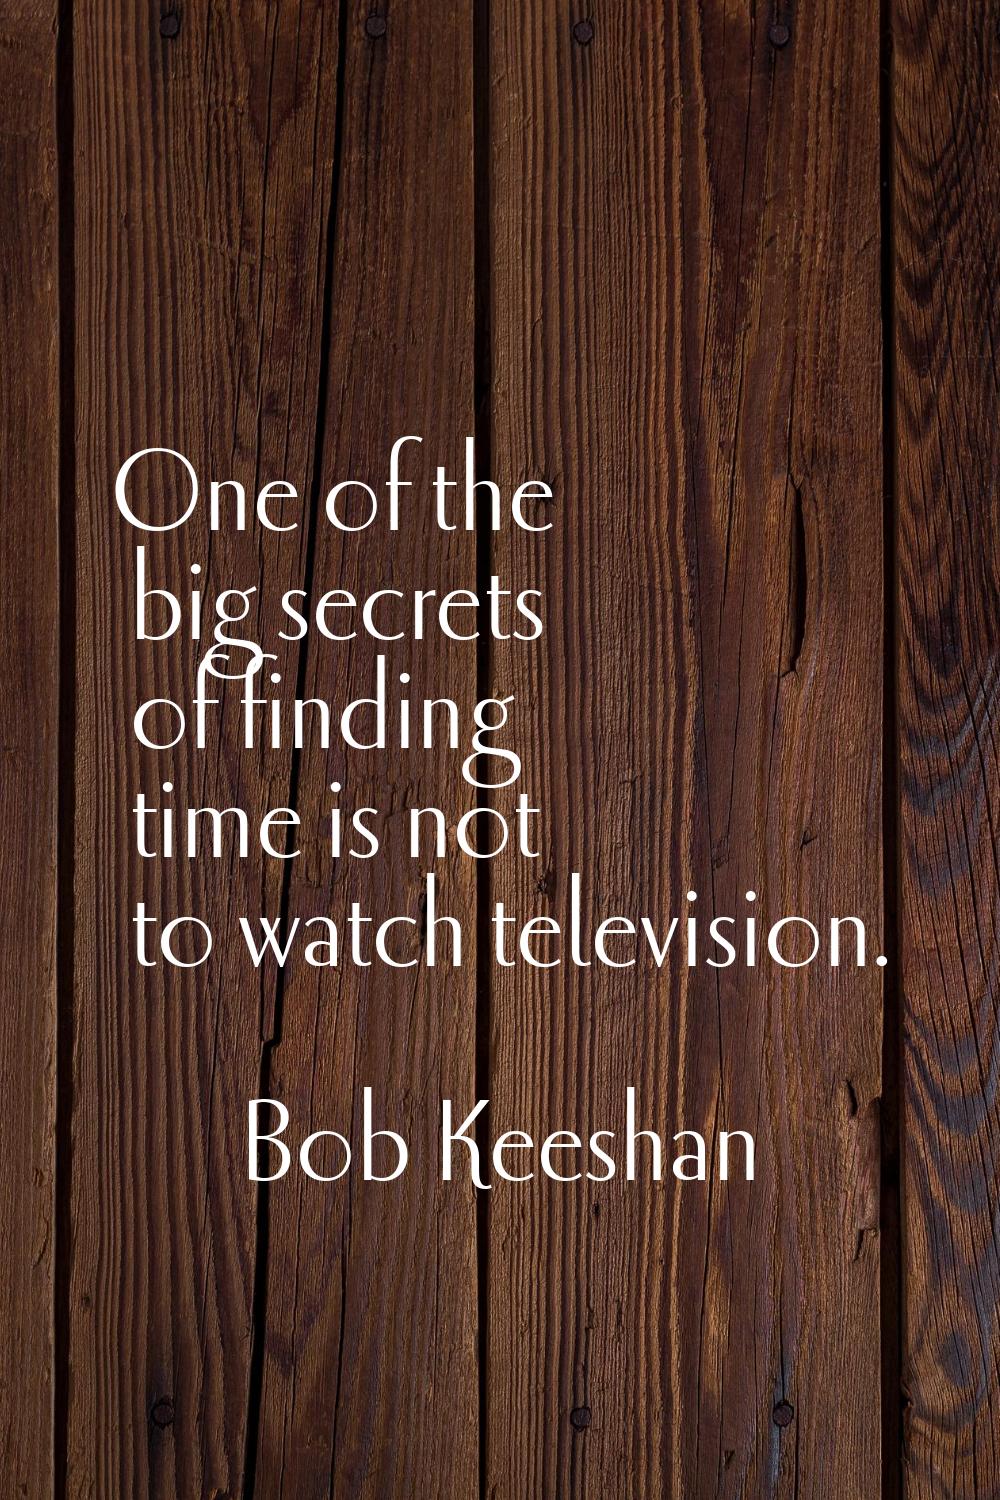 One of the big secrets of finding time is not to watch television.